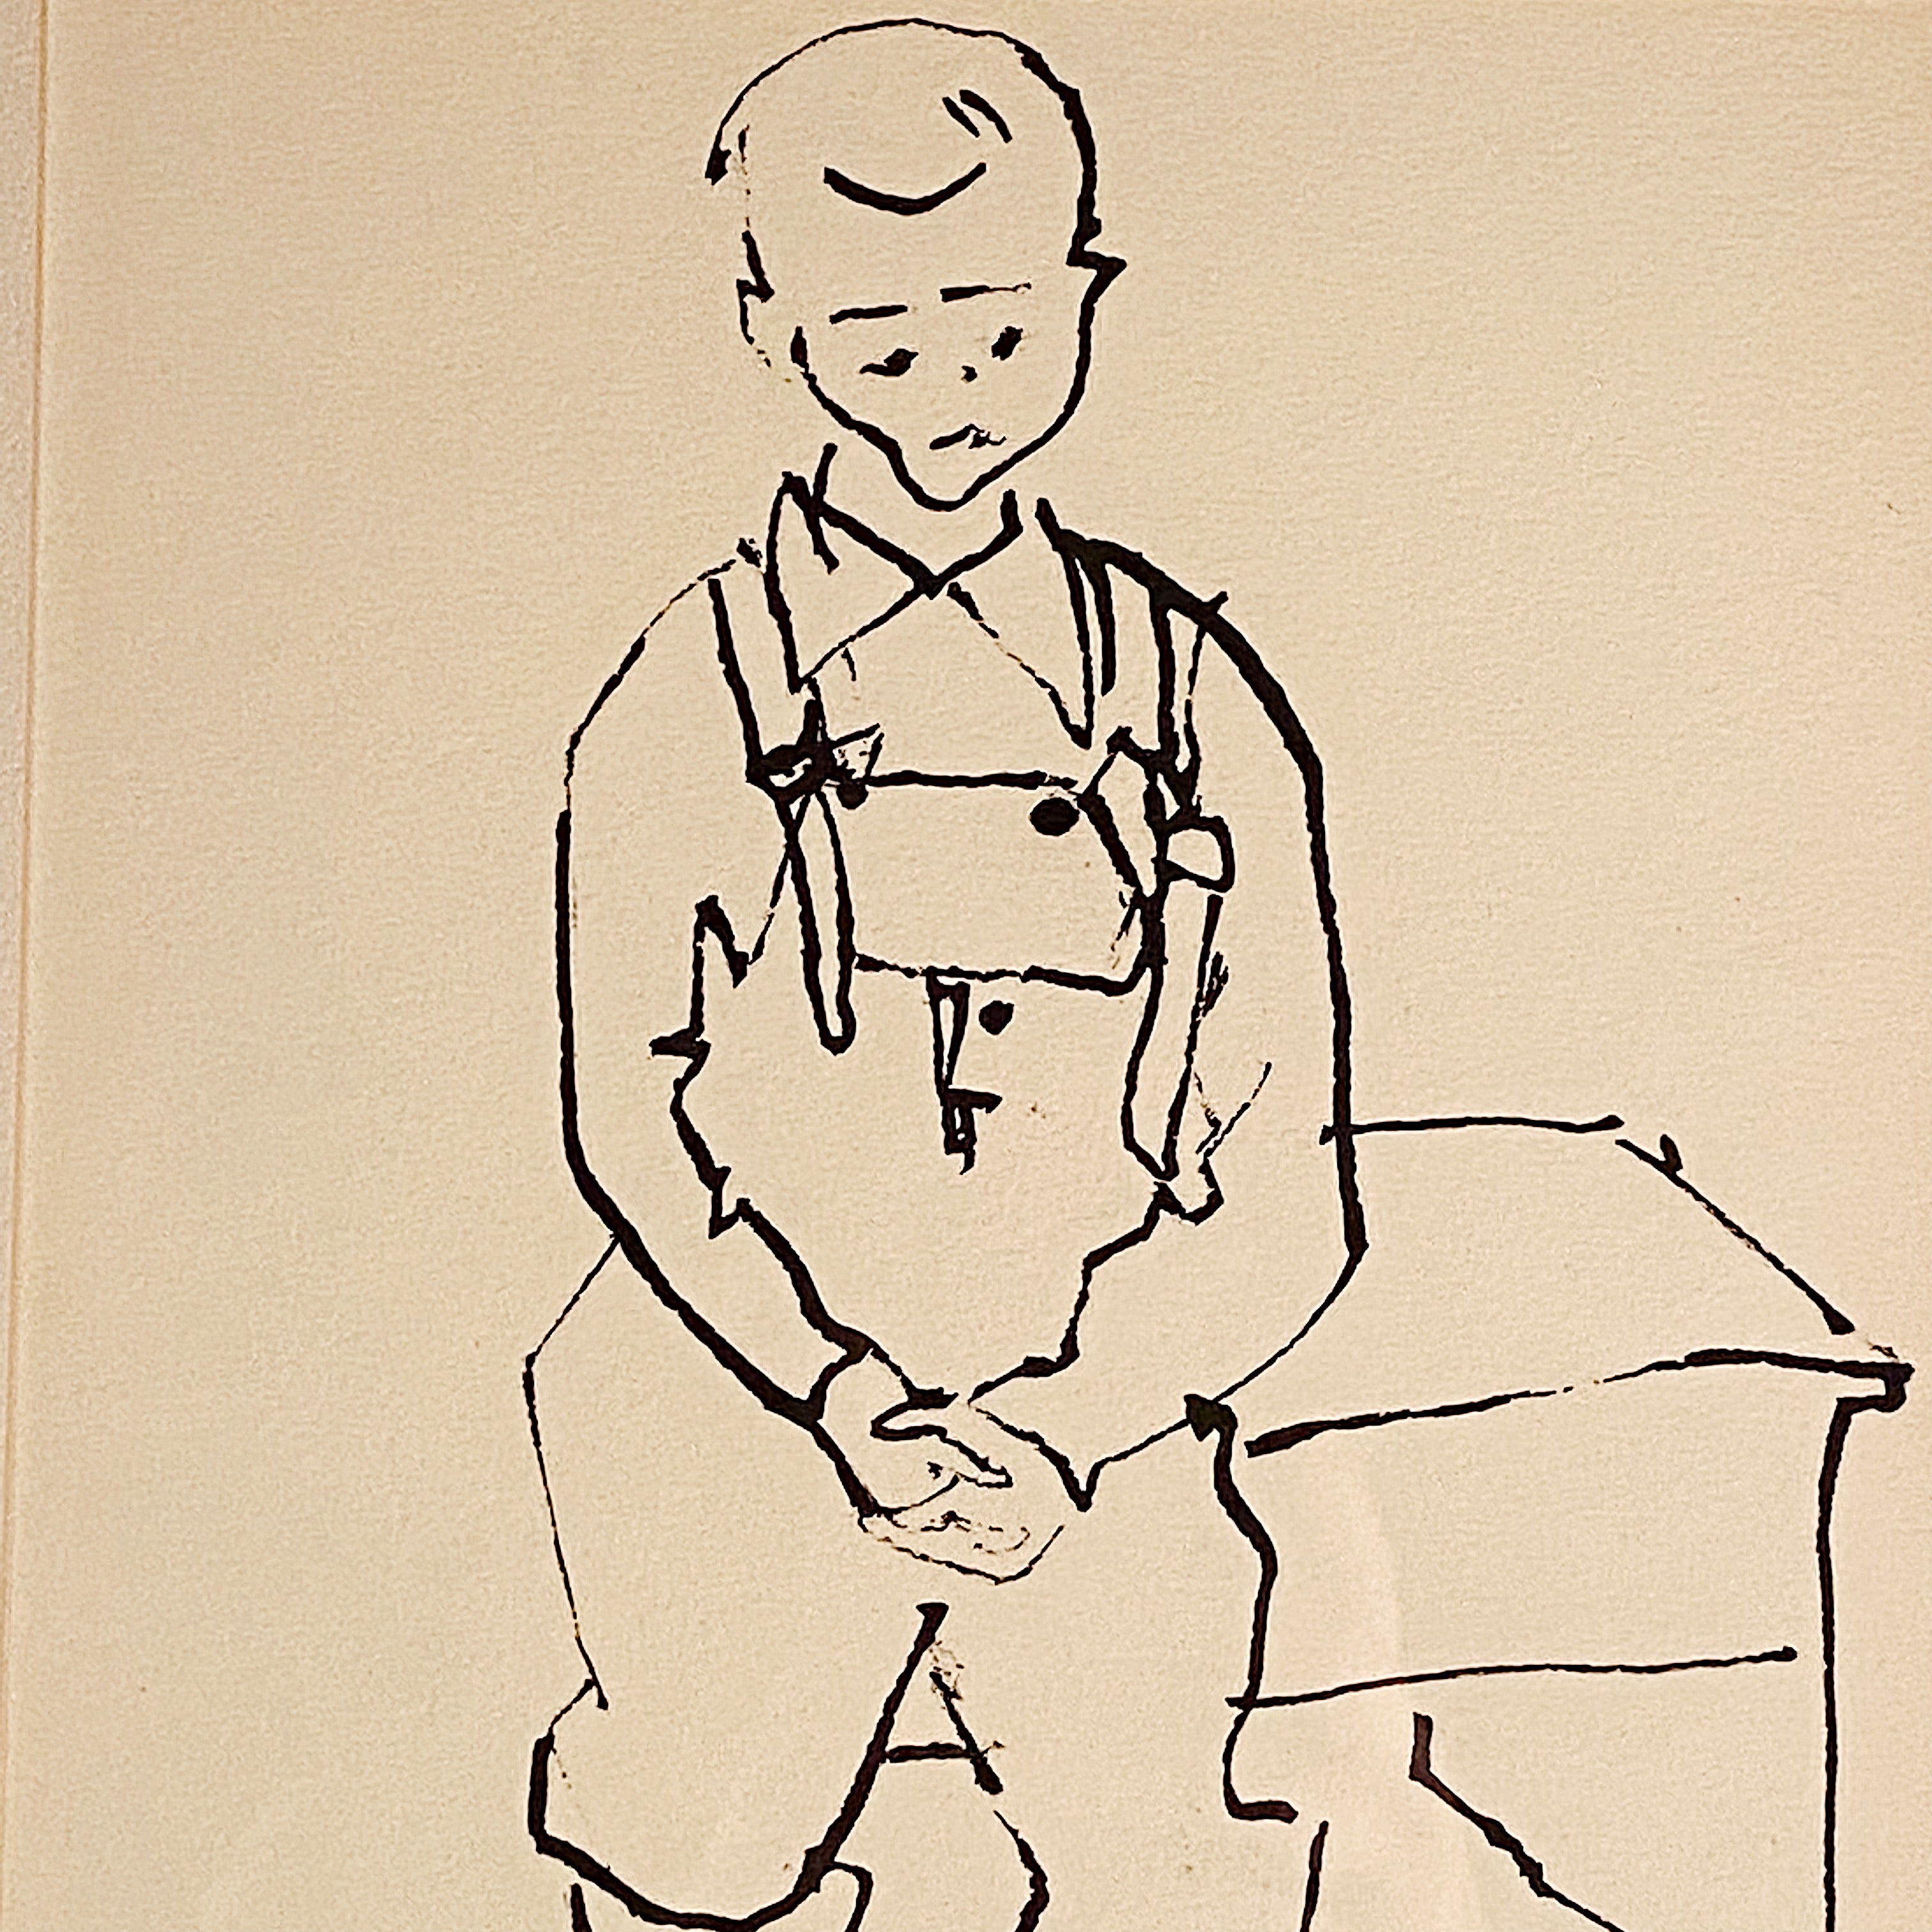 1950s Exhibition Artwork of Boy in Overalls by Etta Wolpert with Provenance - 1954 Drawing - Minneapolis Institute of Art - Titled "Pete"